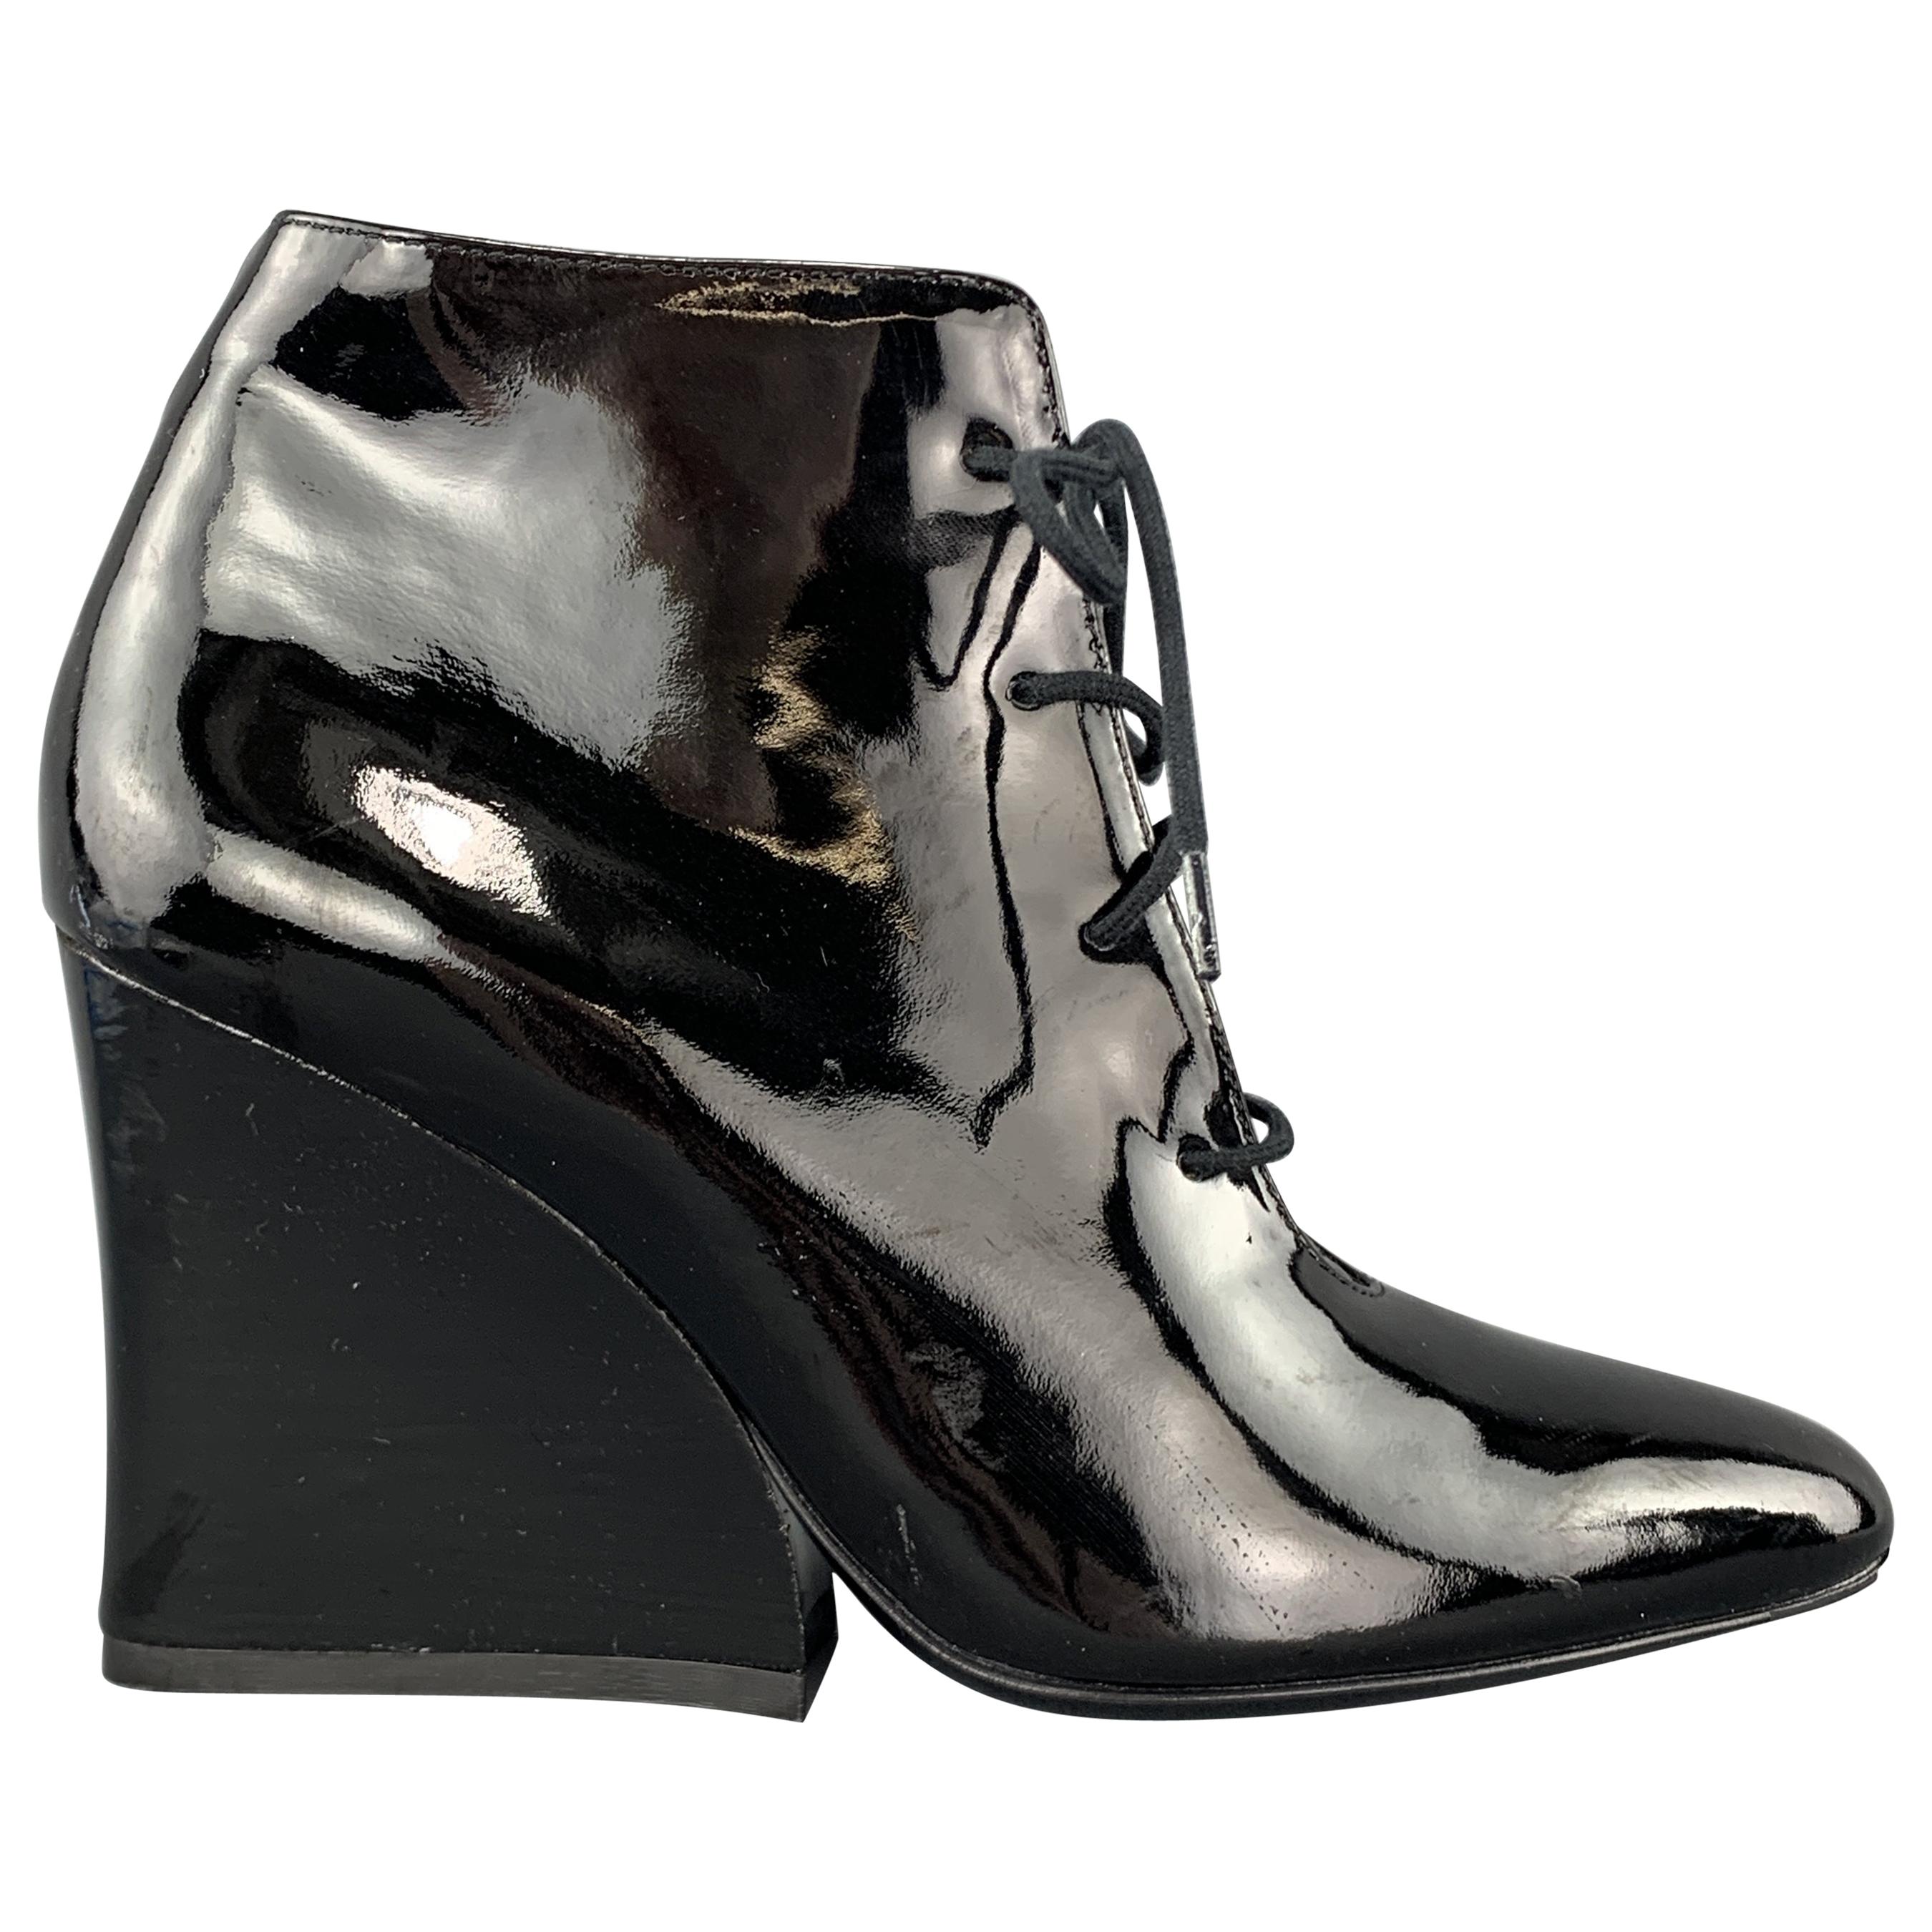 ROBERT CLERGERIE Size 6 Black Patent Leather Chunky Heel Ankle Boots